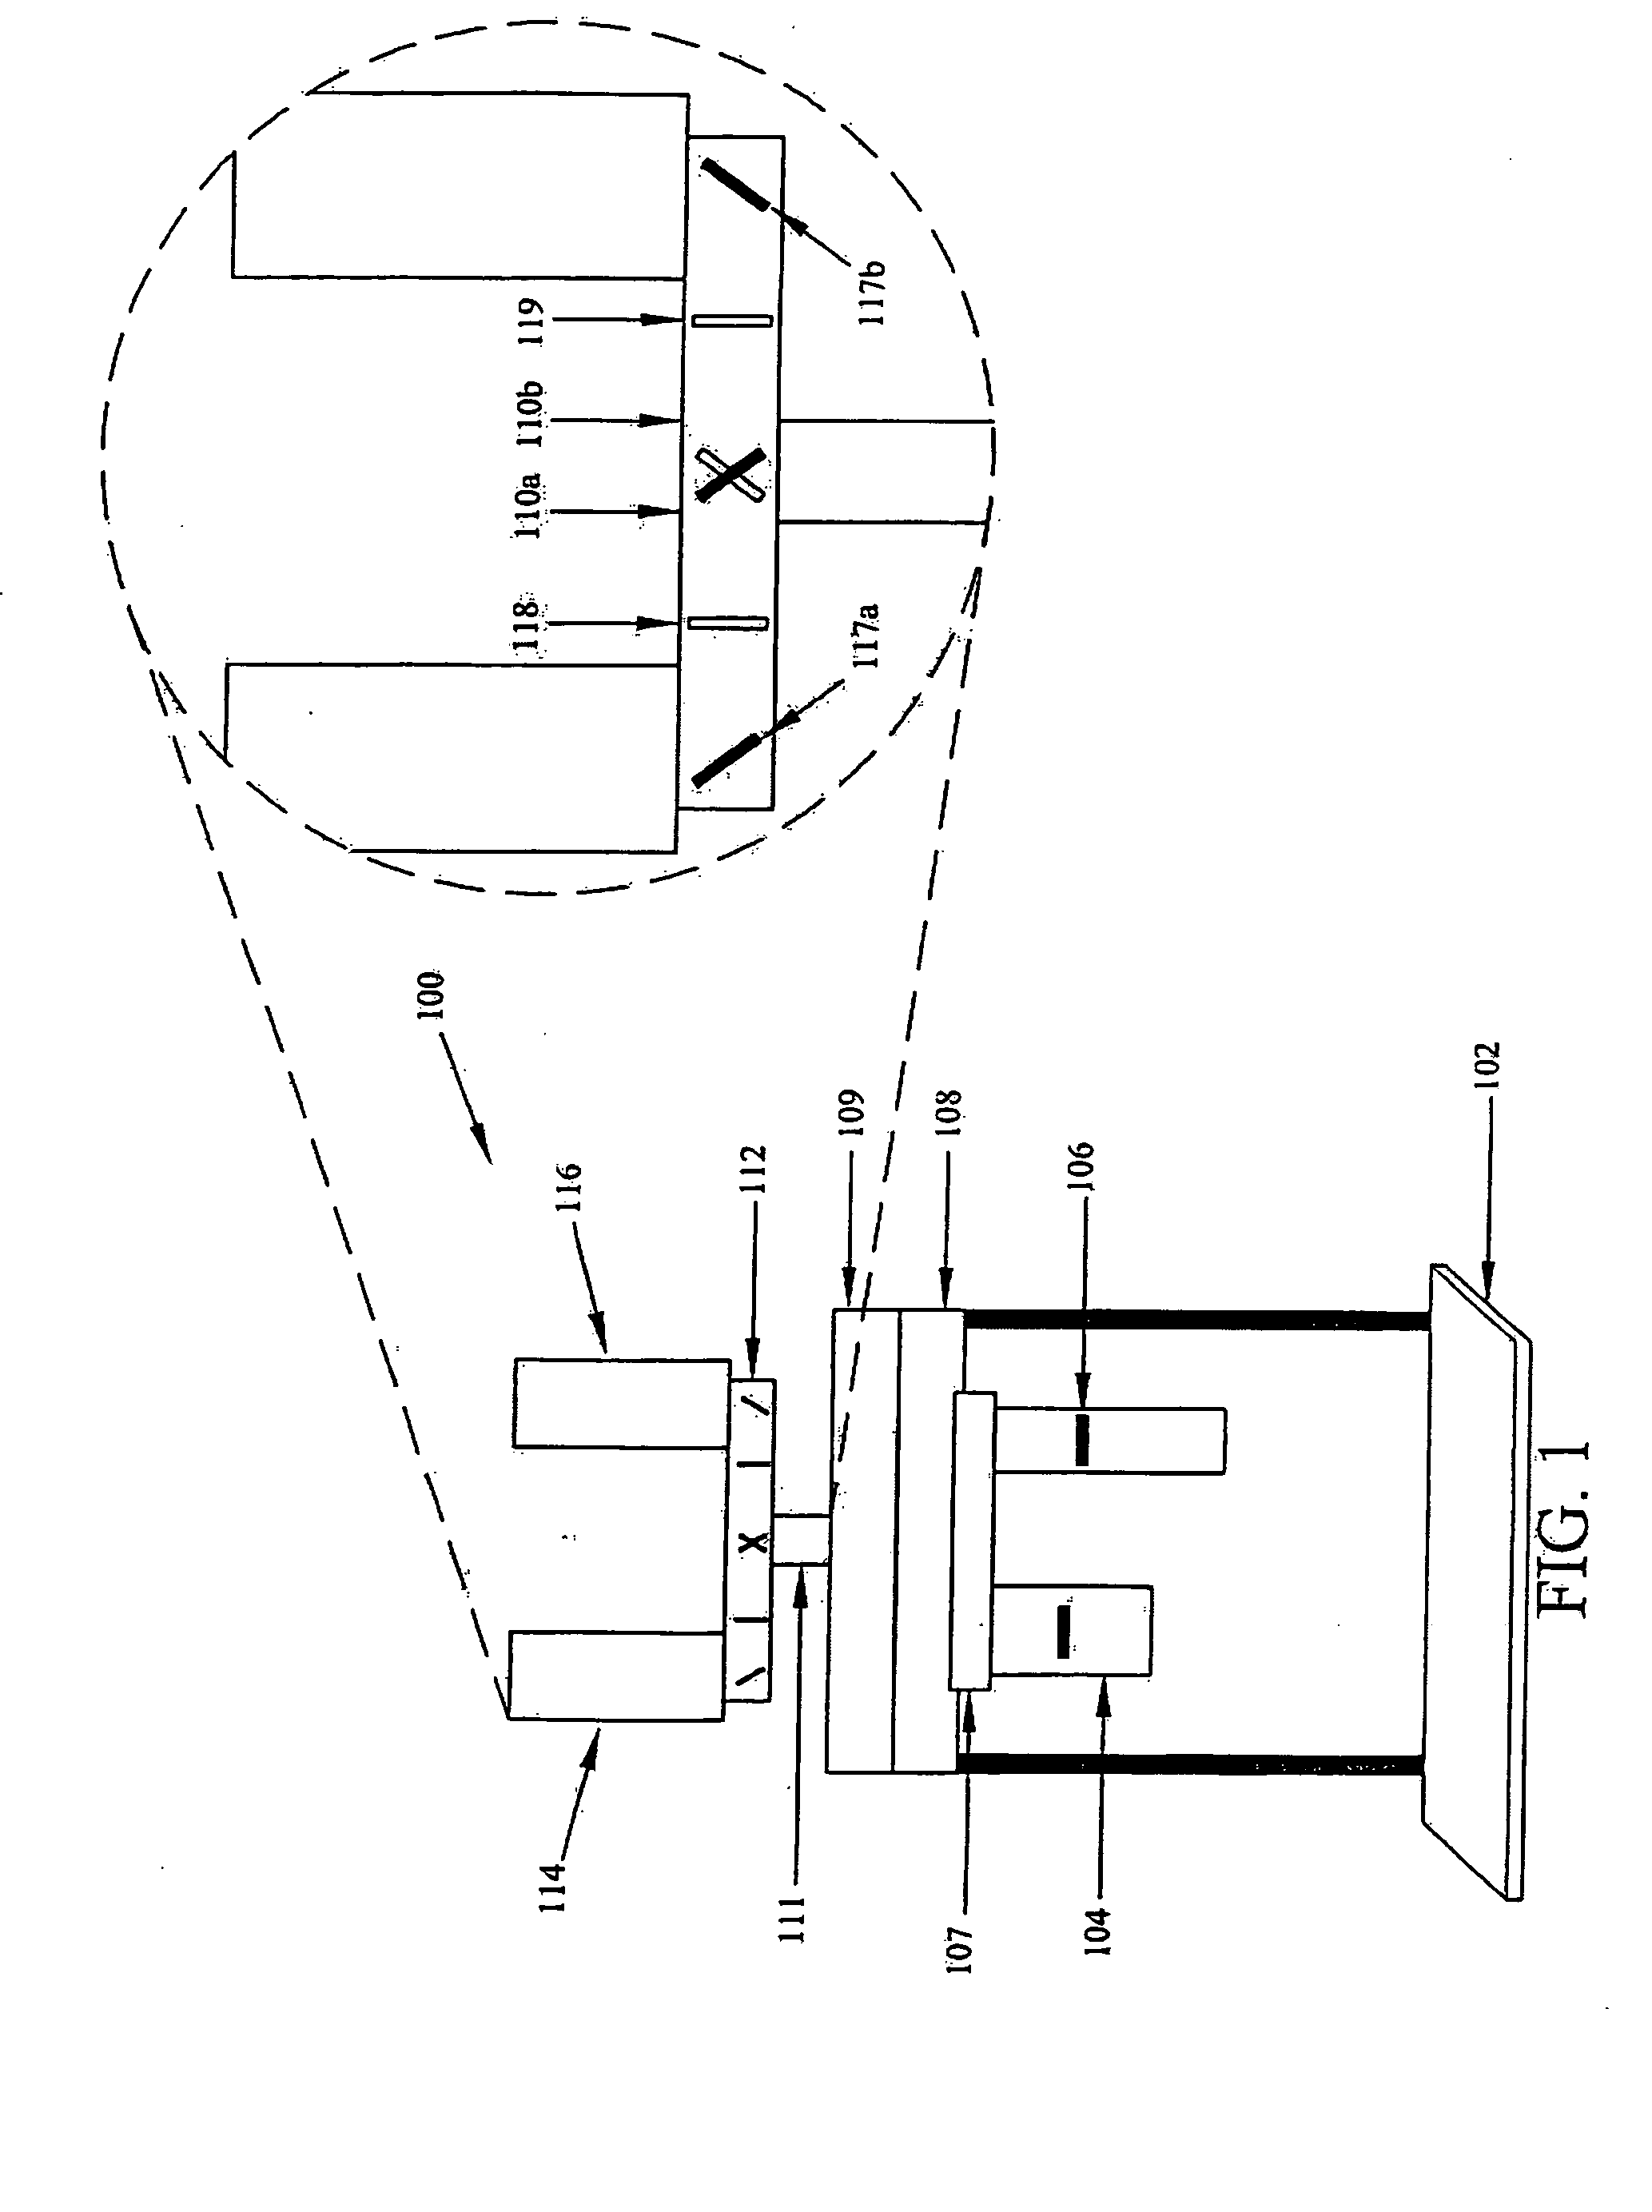 Method and apparatus for extended hyperspectral imaging